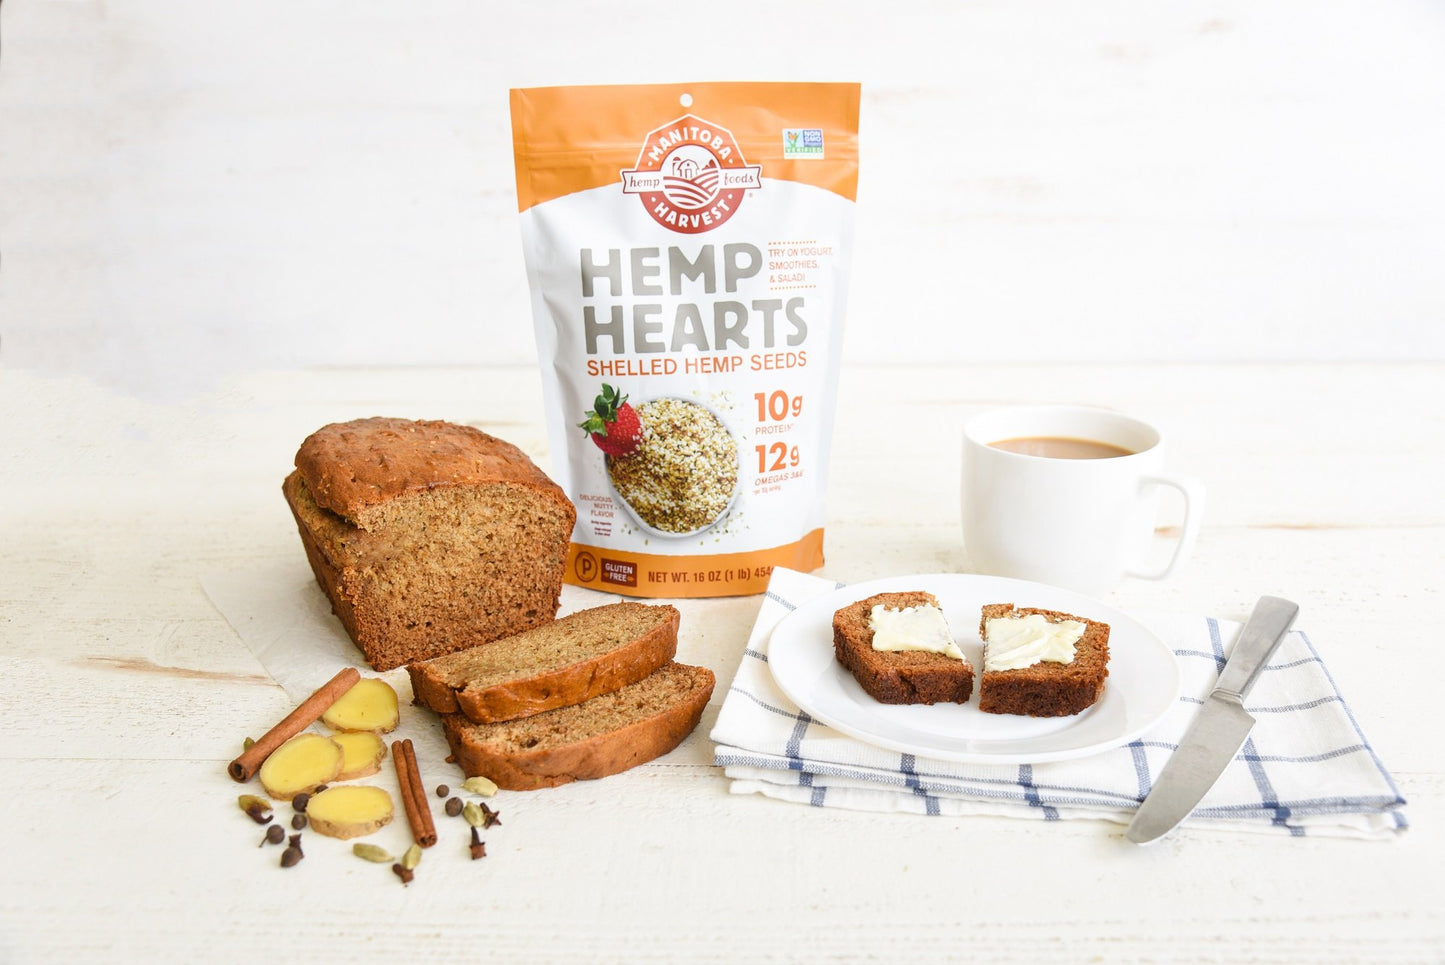 Non-GMO Hemp Hearts Manitoba Harvest Chai Spiced Loaf Bread Recipe With Shelled Hemp Seeds And Autumn Spices